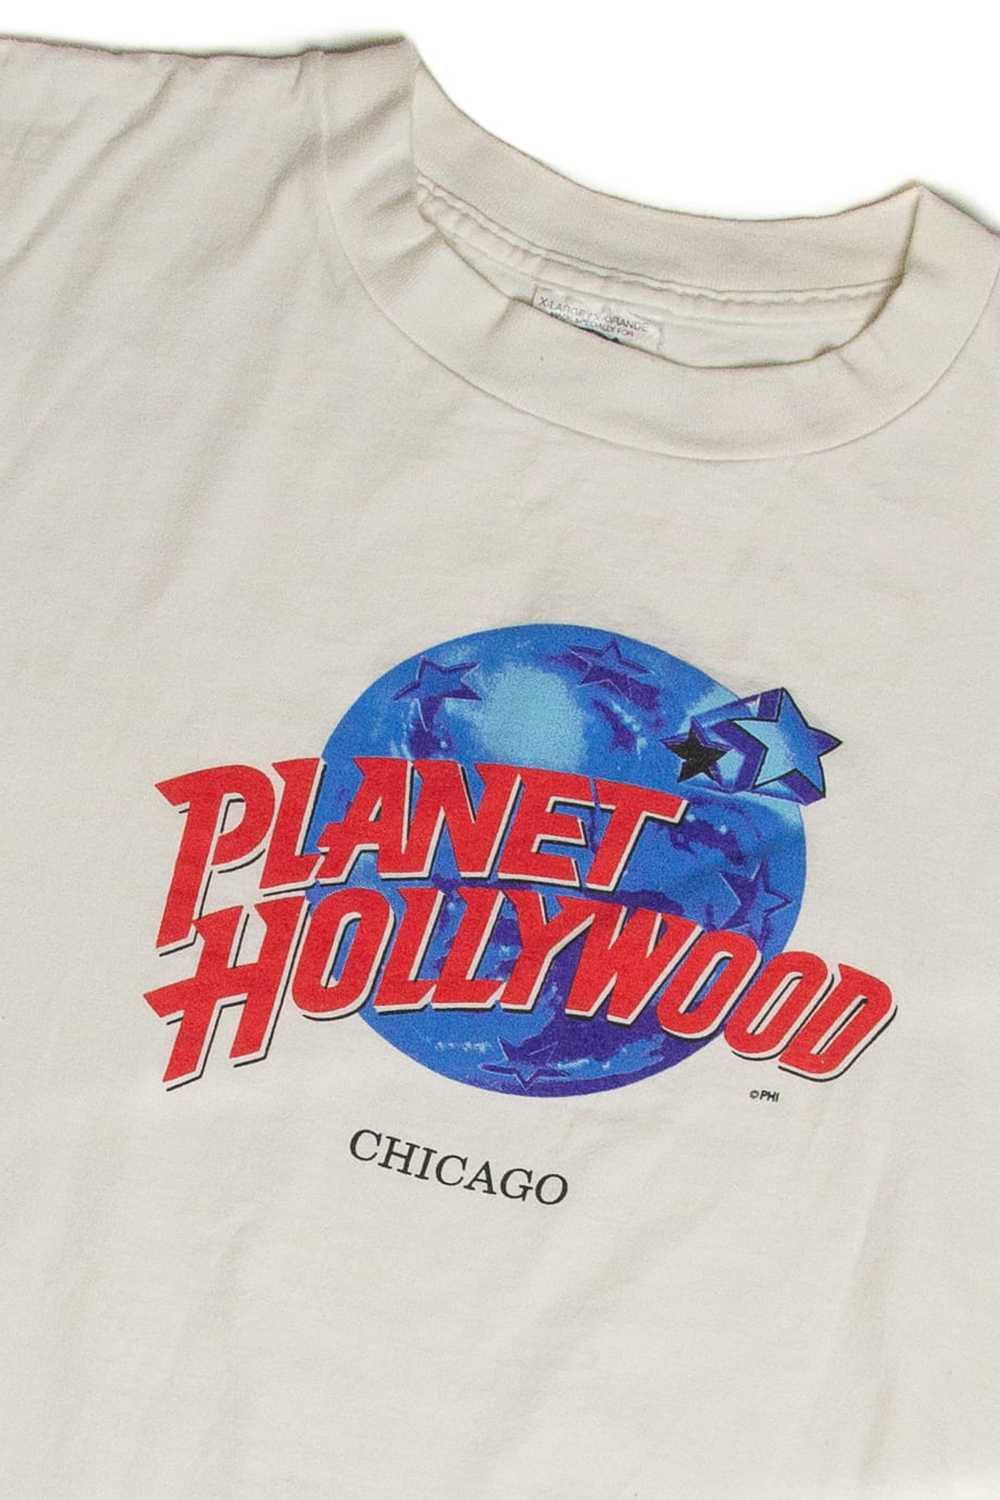 Vintage Planet Hollywood Chicago T-Shirt - image 2